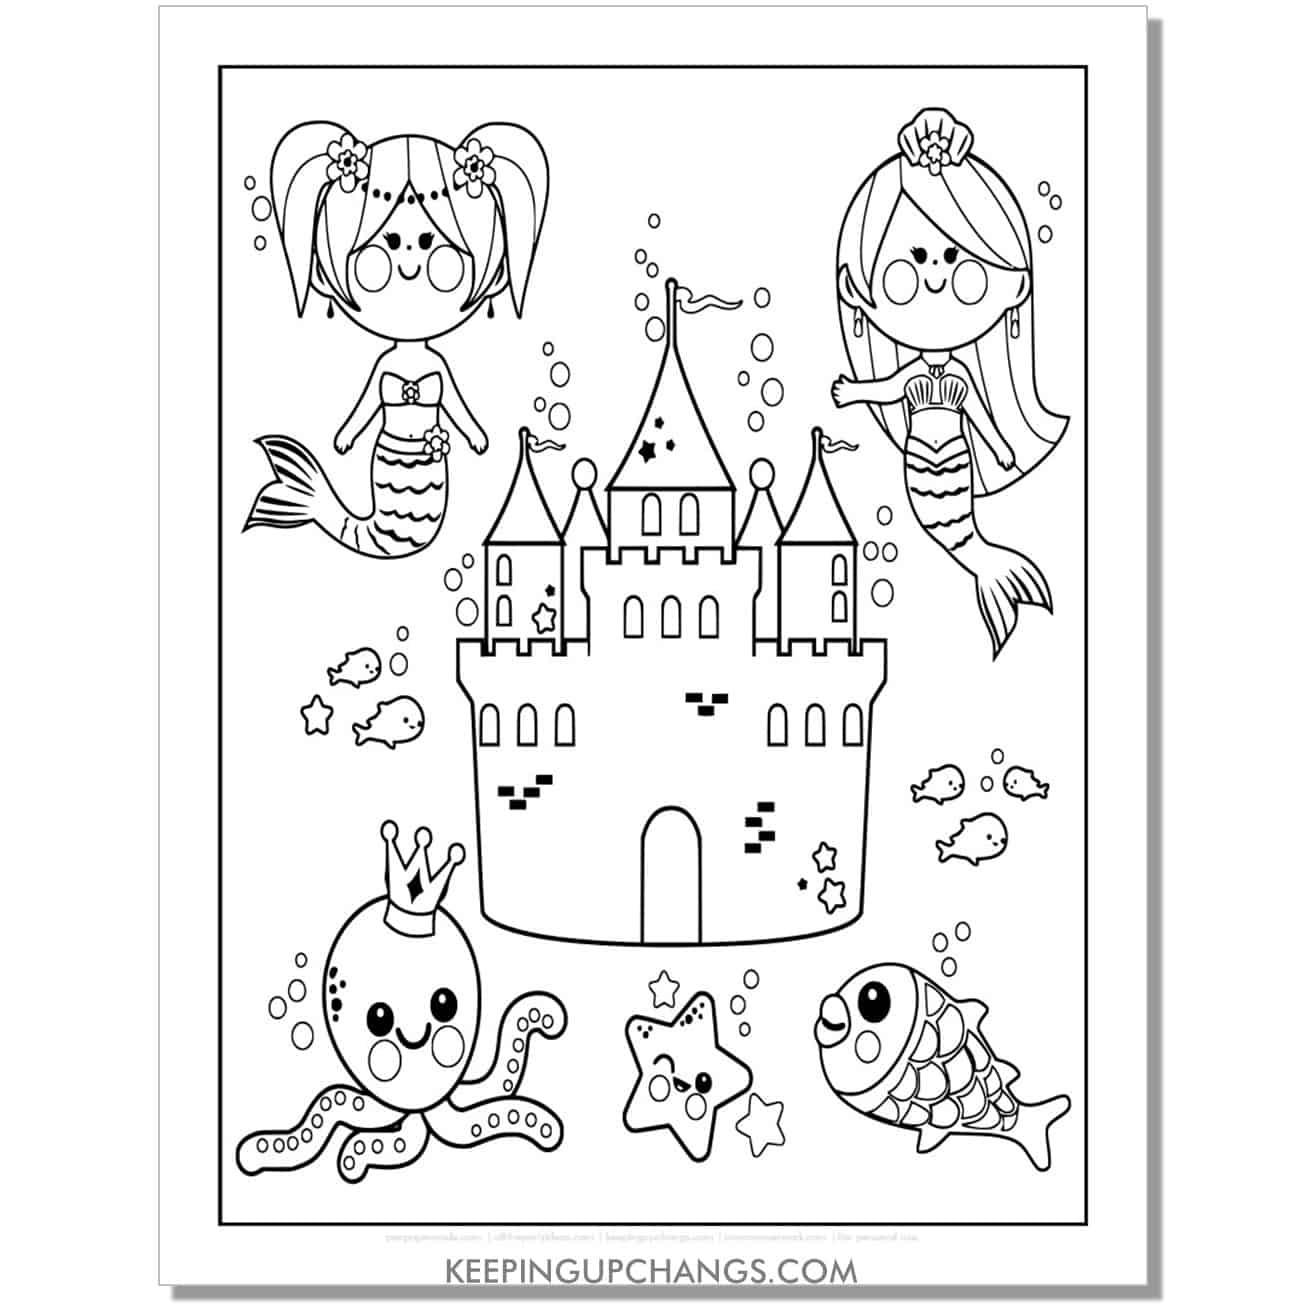 free mermaid, castle, octopus, sea star, starfish coloring page, sheet.